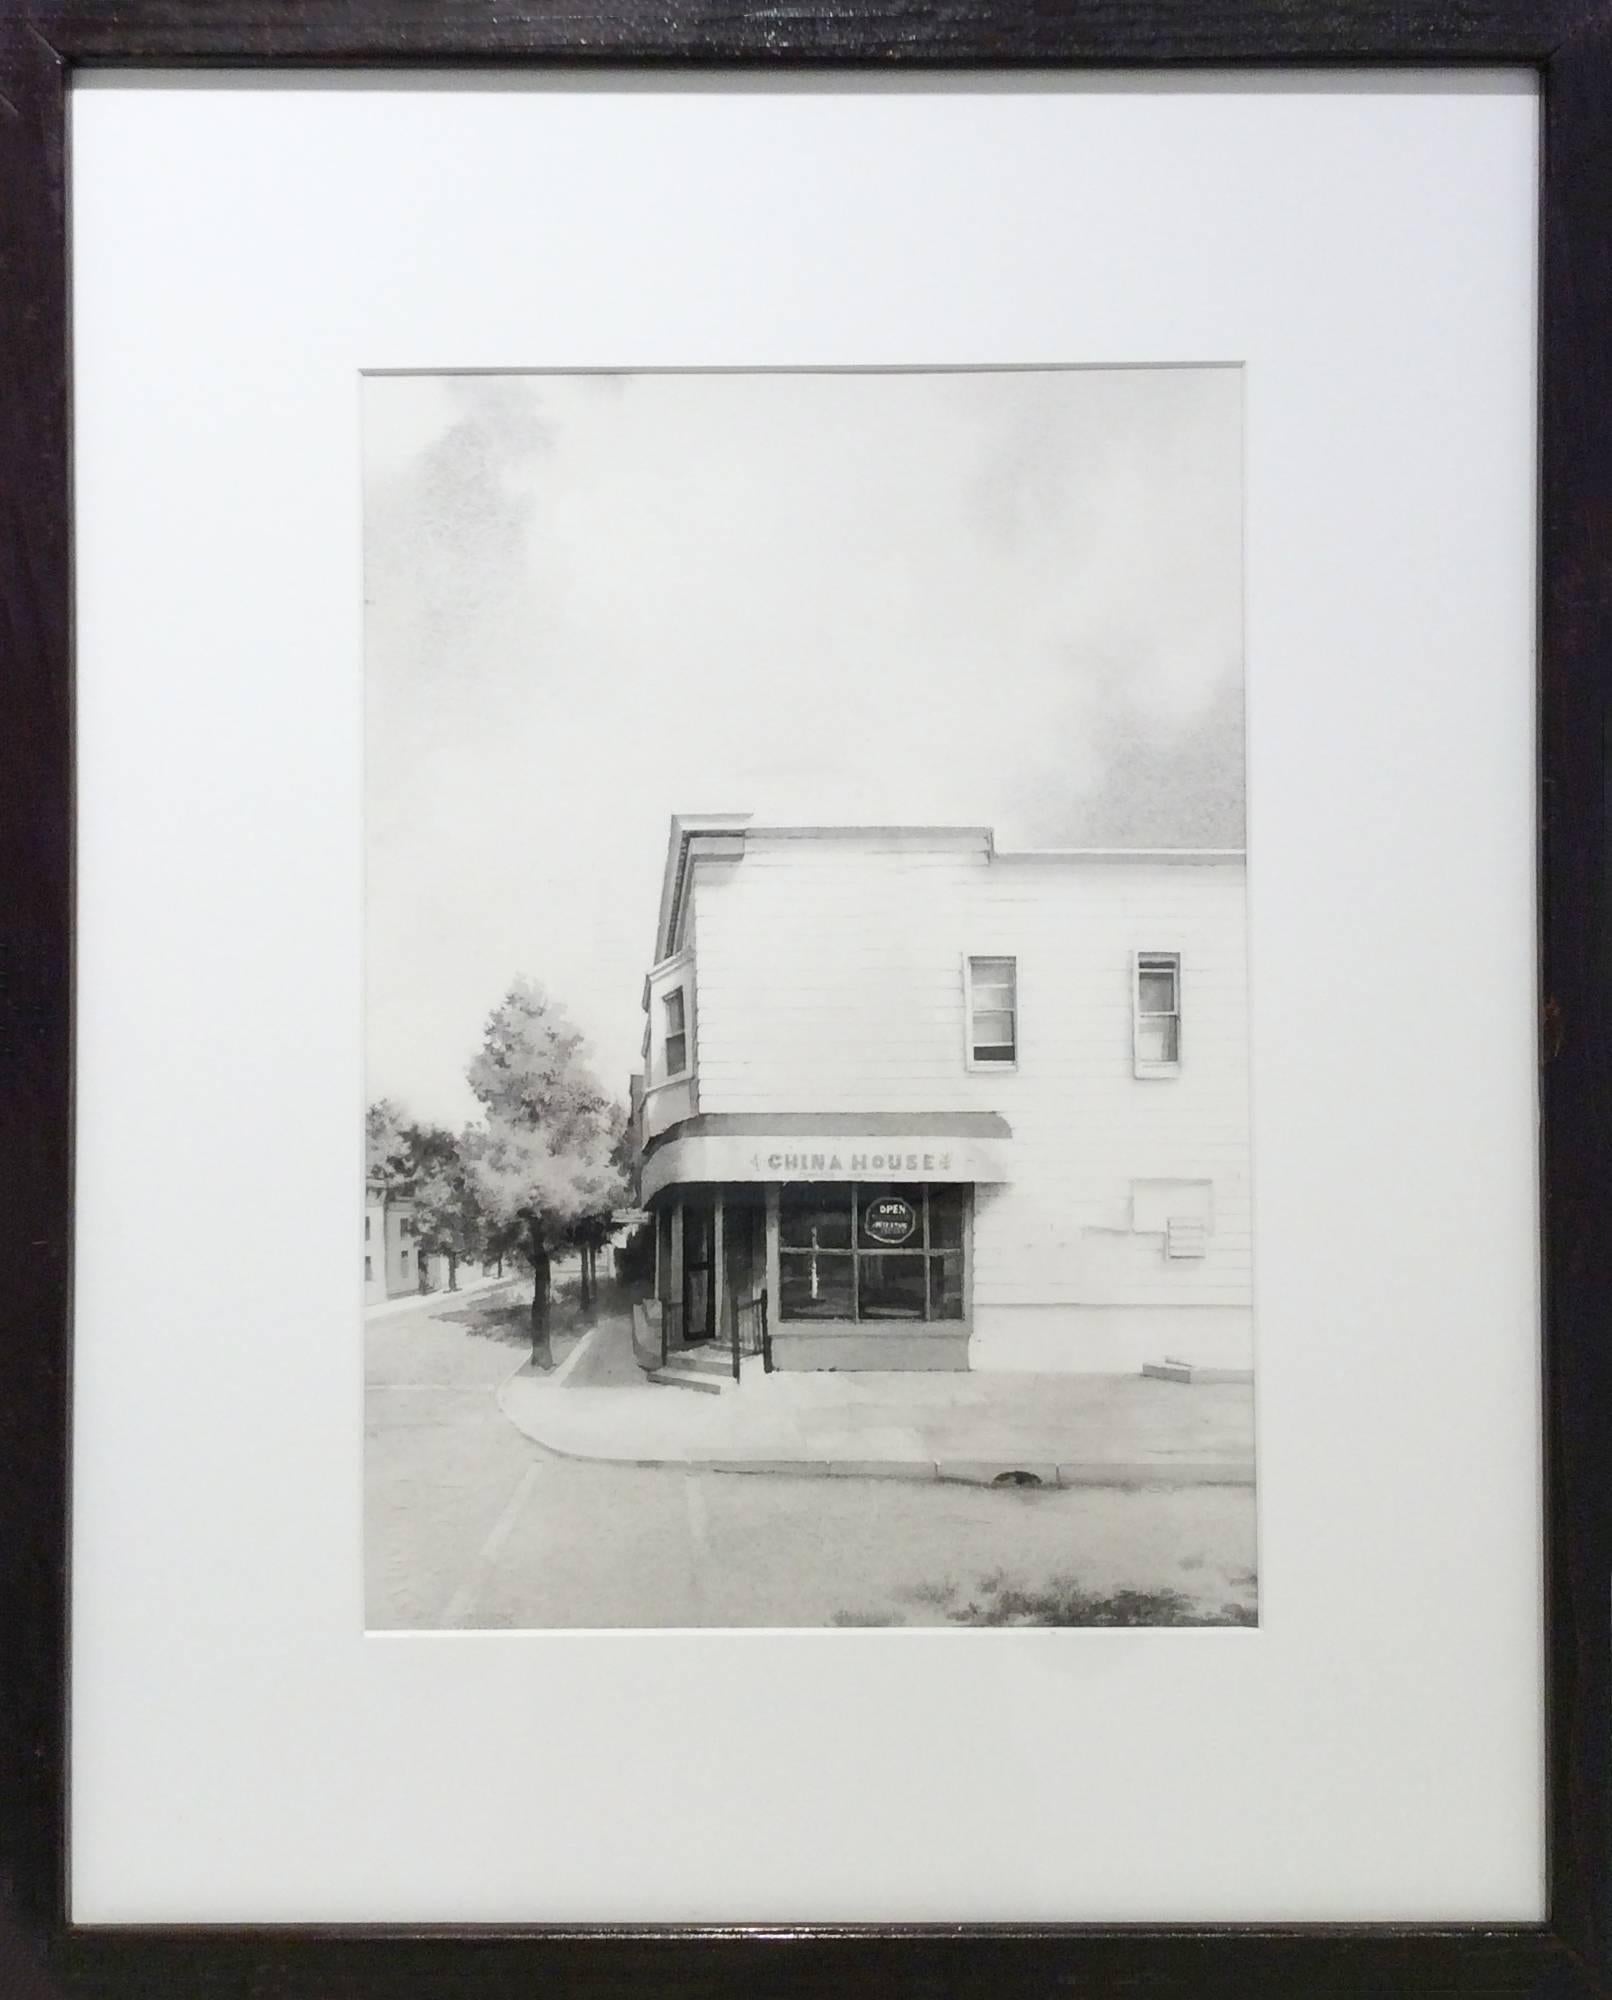 This photo-realist cityscape of a corner Chinese restaurant was painted with black and white watercolor by Scott Nelson Foster in 2016. The contemporary cityscape is completed in exquisite detail with close attention paid to perspective, depth, and